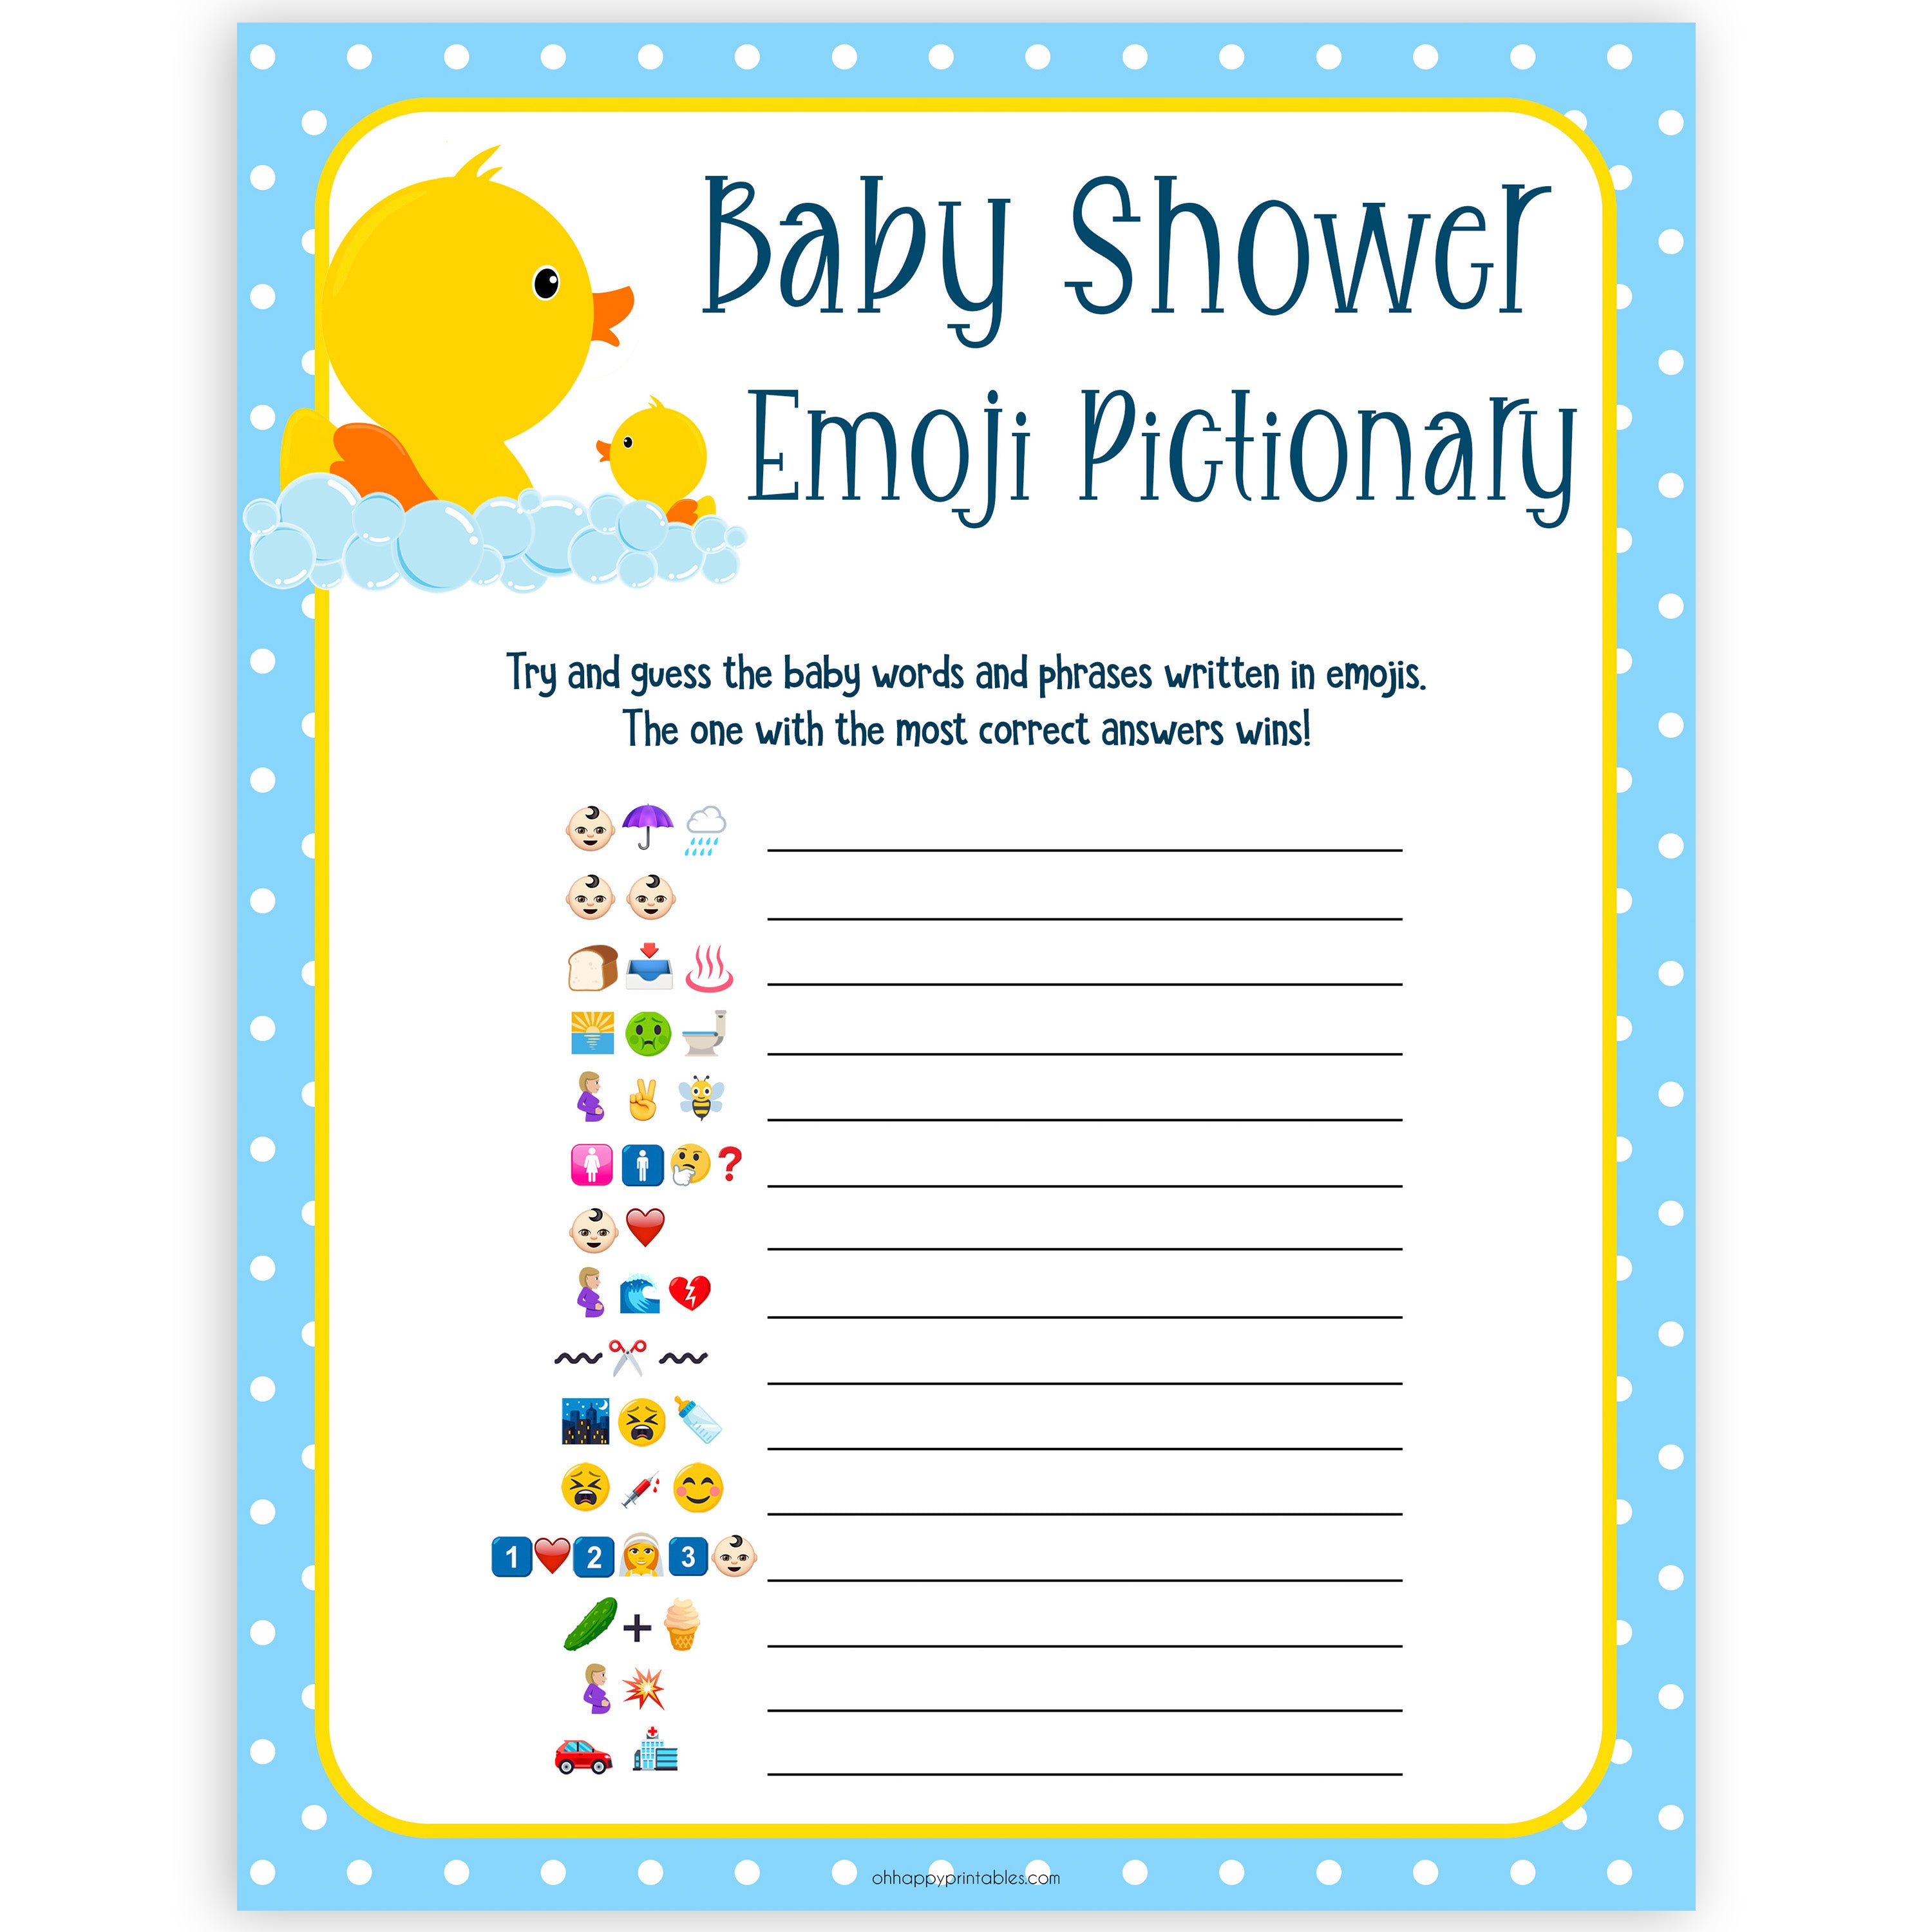 Baby Emoji Pictionary Printable Rubber Ducky Baby Shower Games